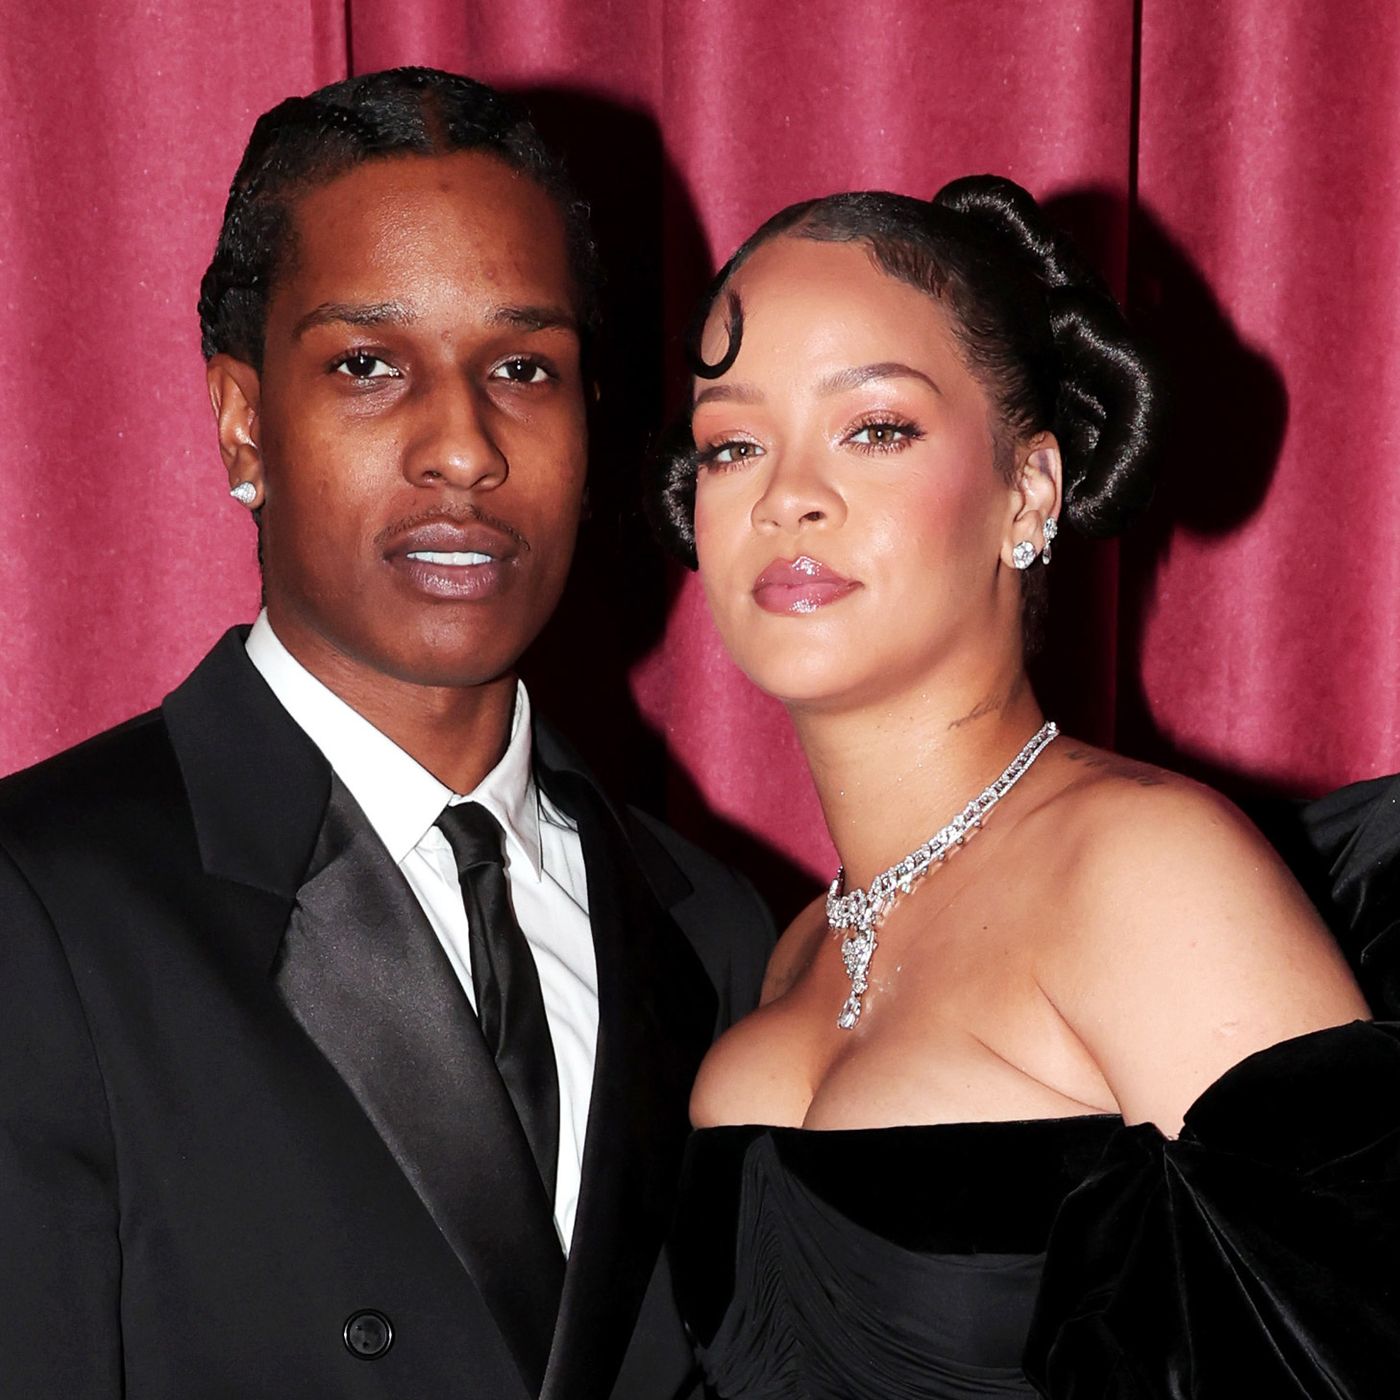 Rihanna and A$AP Rocky Are Finally Done Playing Coy